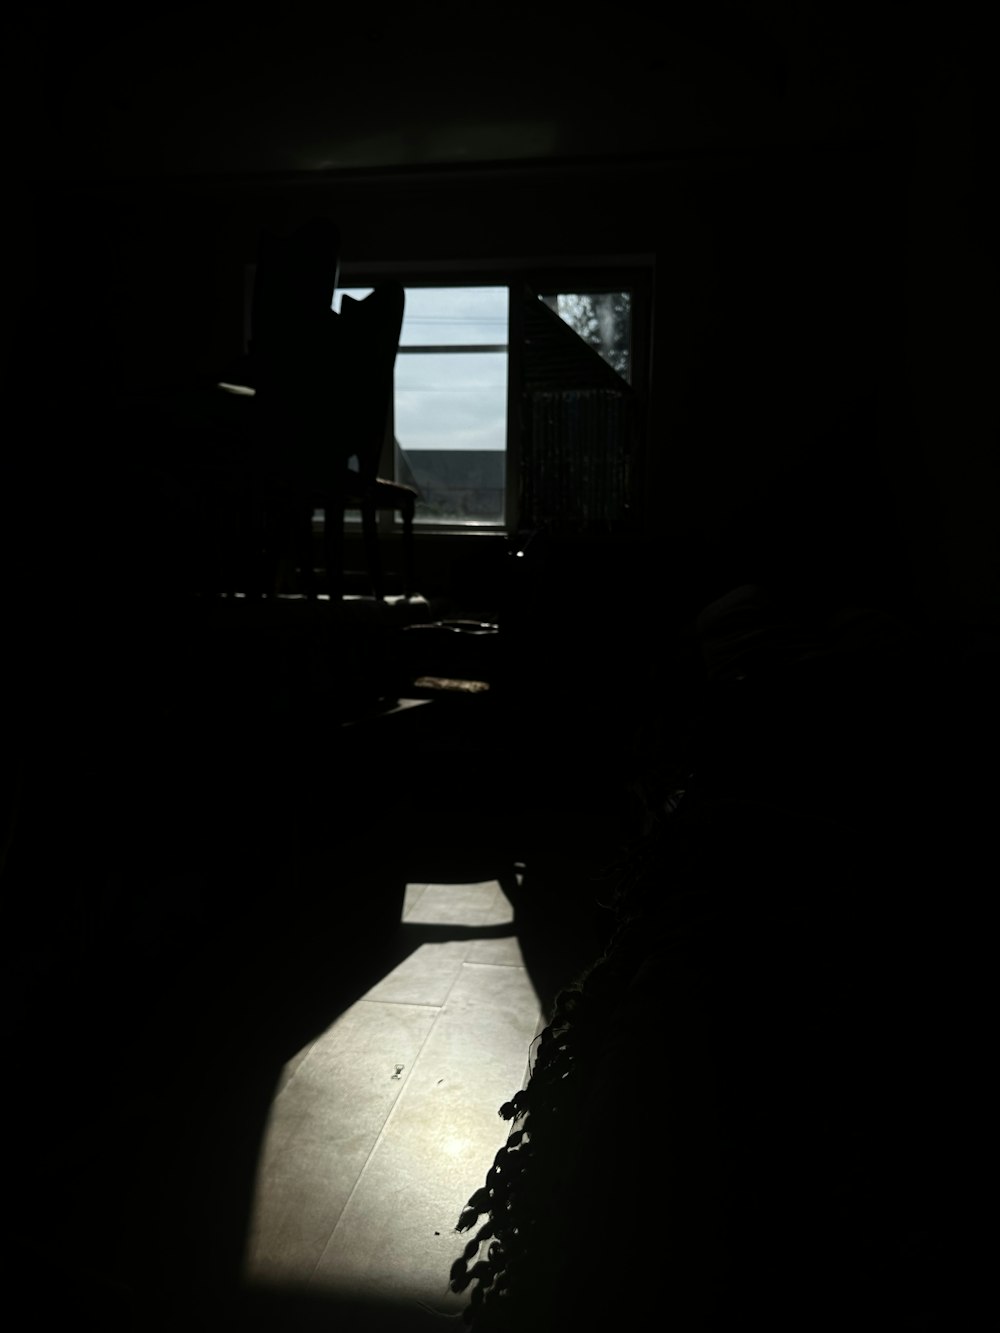 a person standing in a dark room with a window